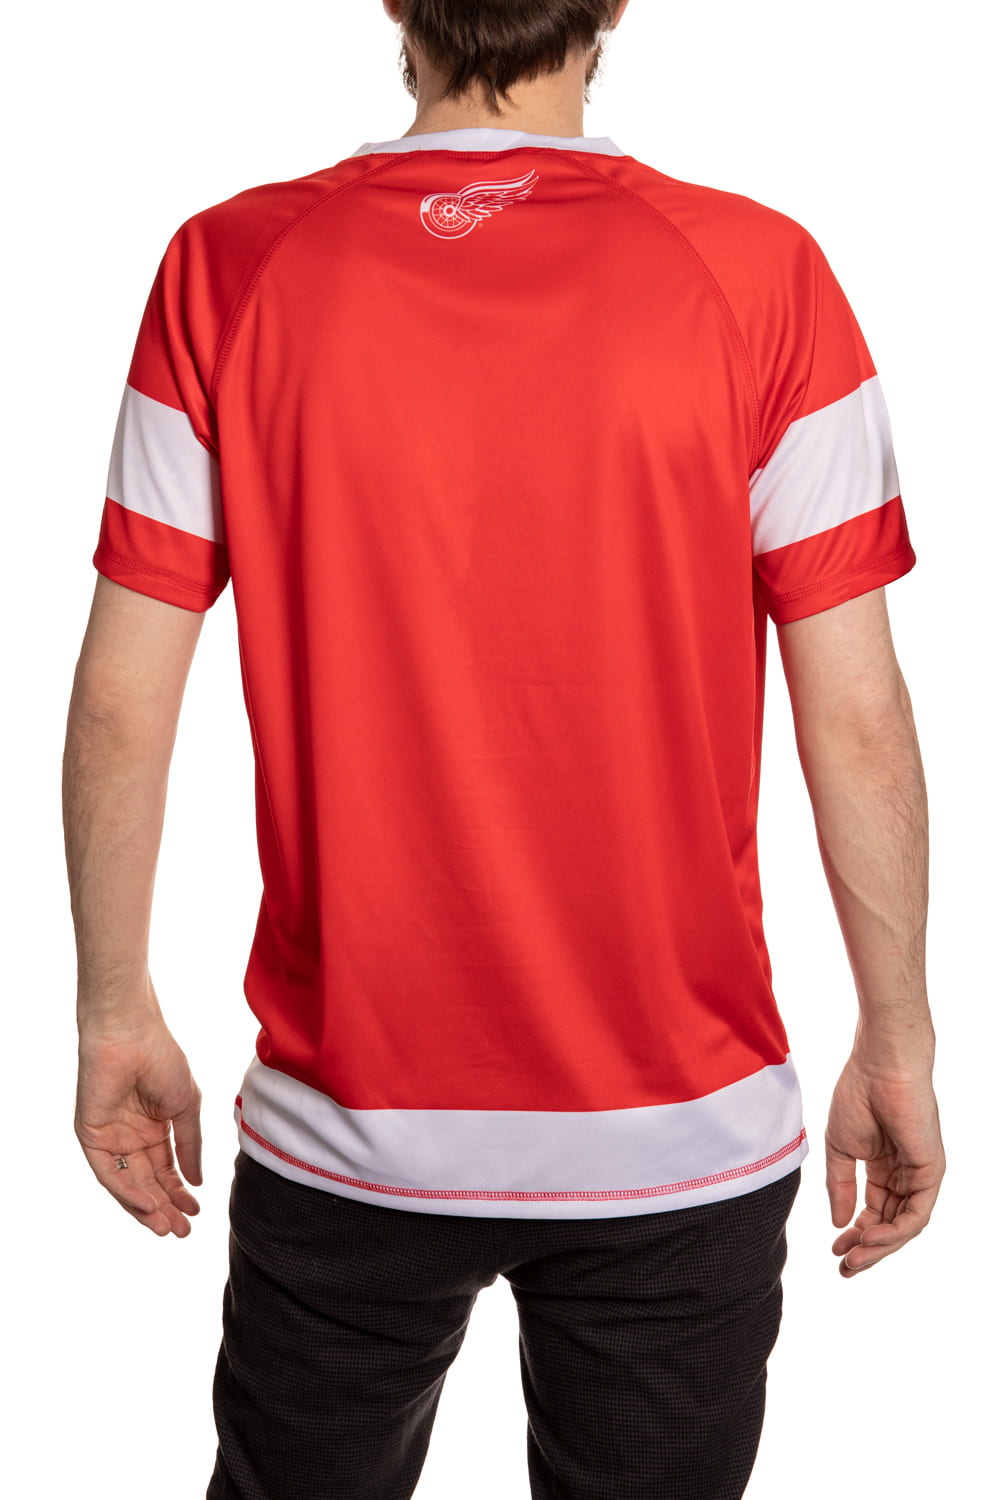 Detroit Red Wing Short Sleeve Rashguard Back View. Black Shirt With White Accents.